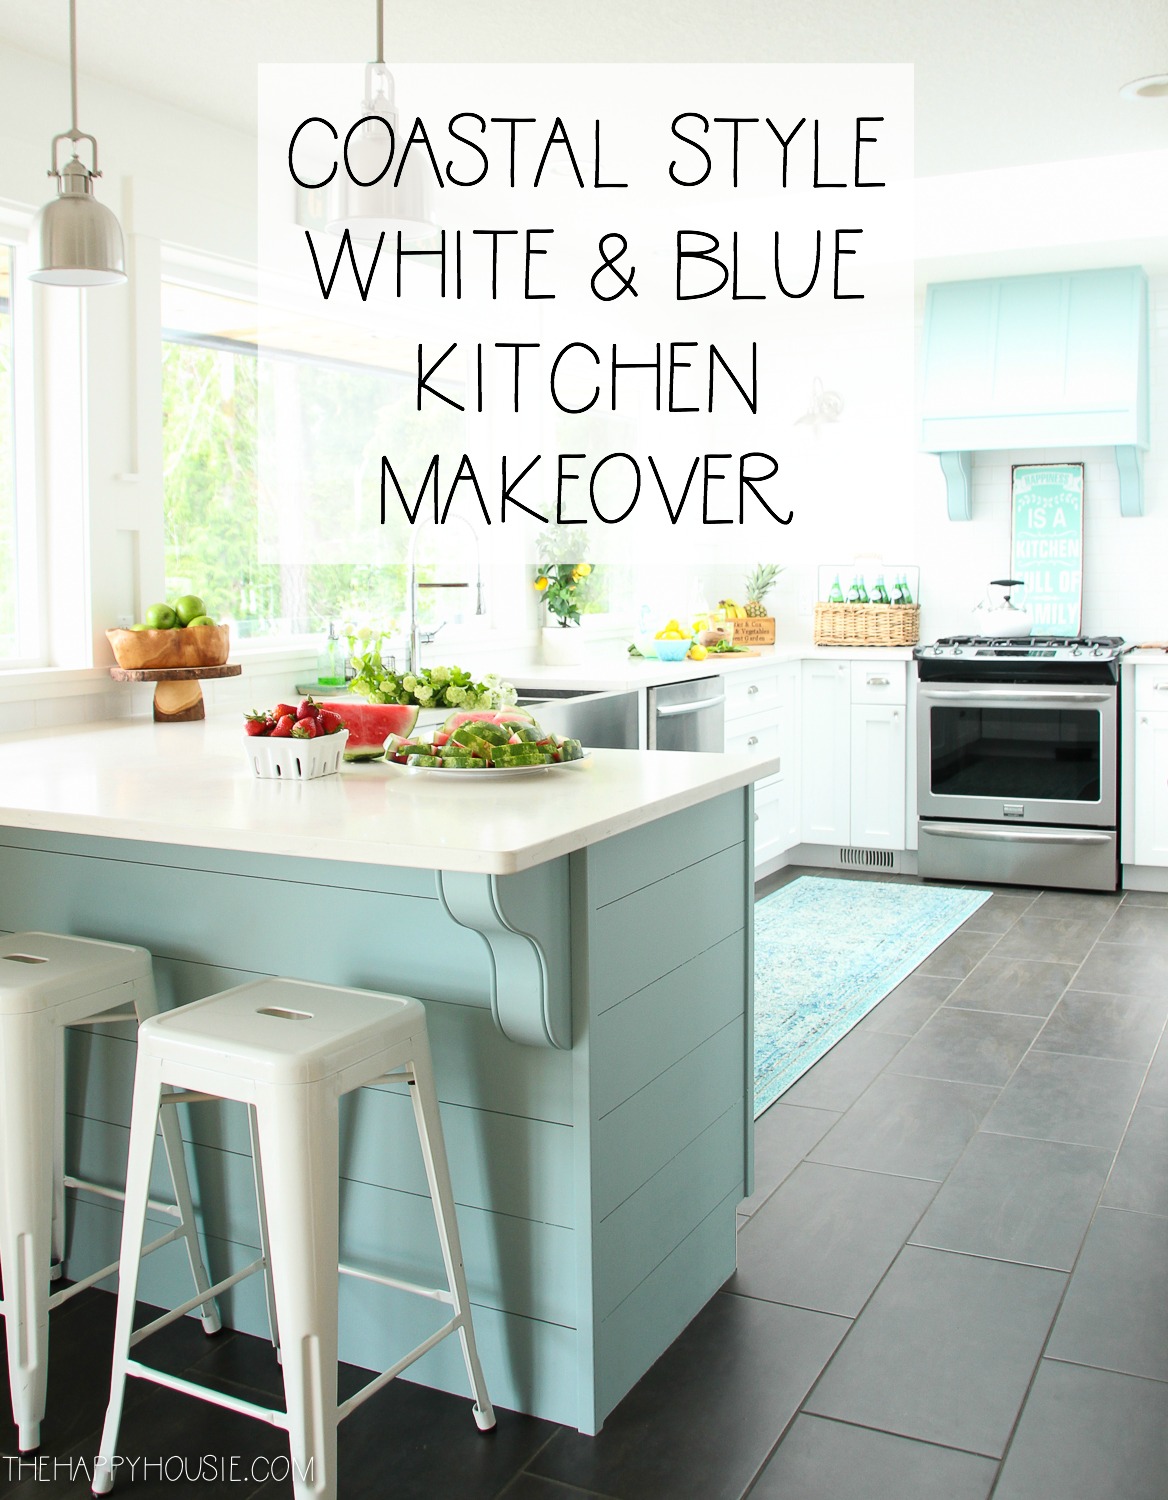 Coastal style white and blue kitchen makeover graphic.